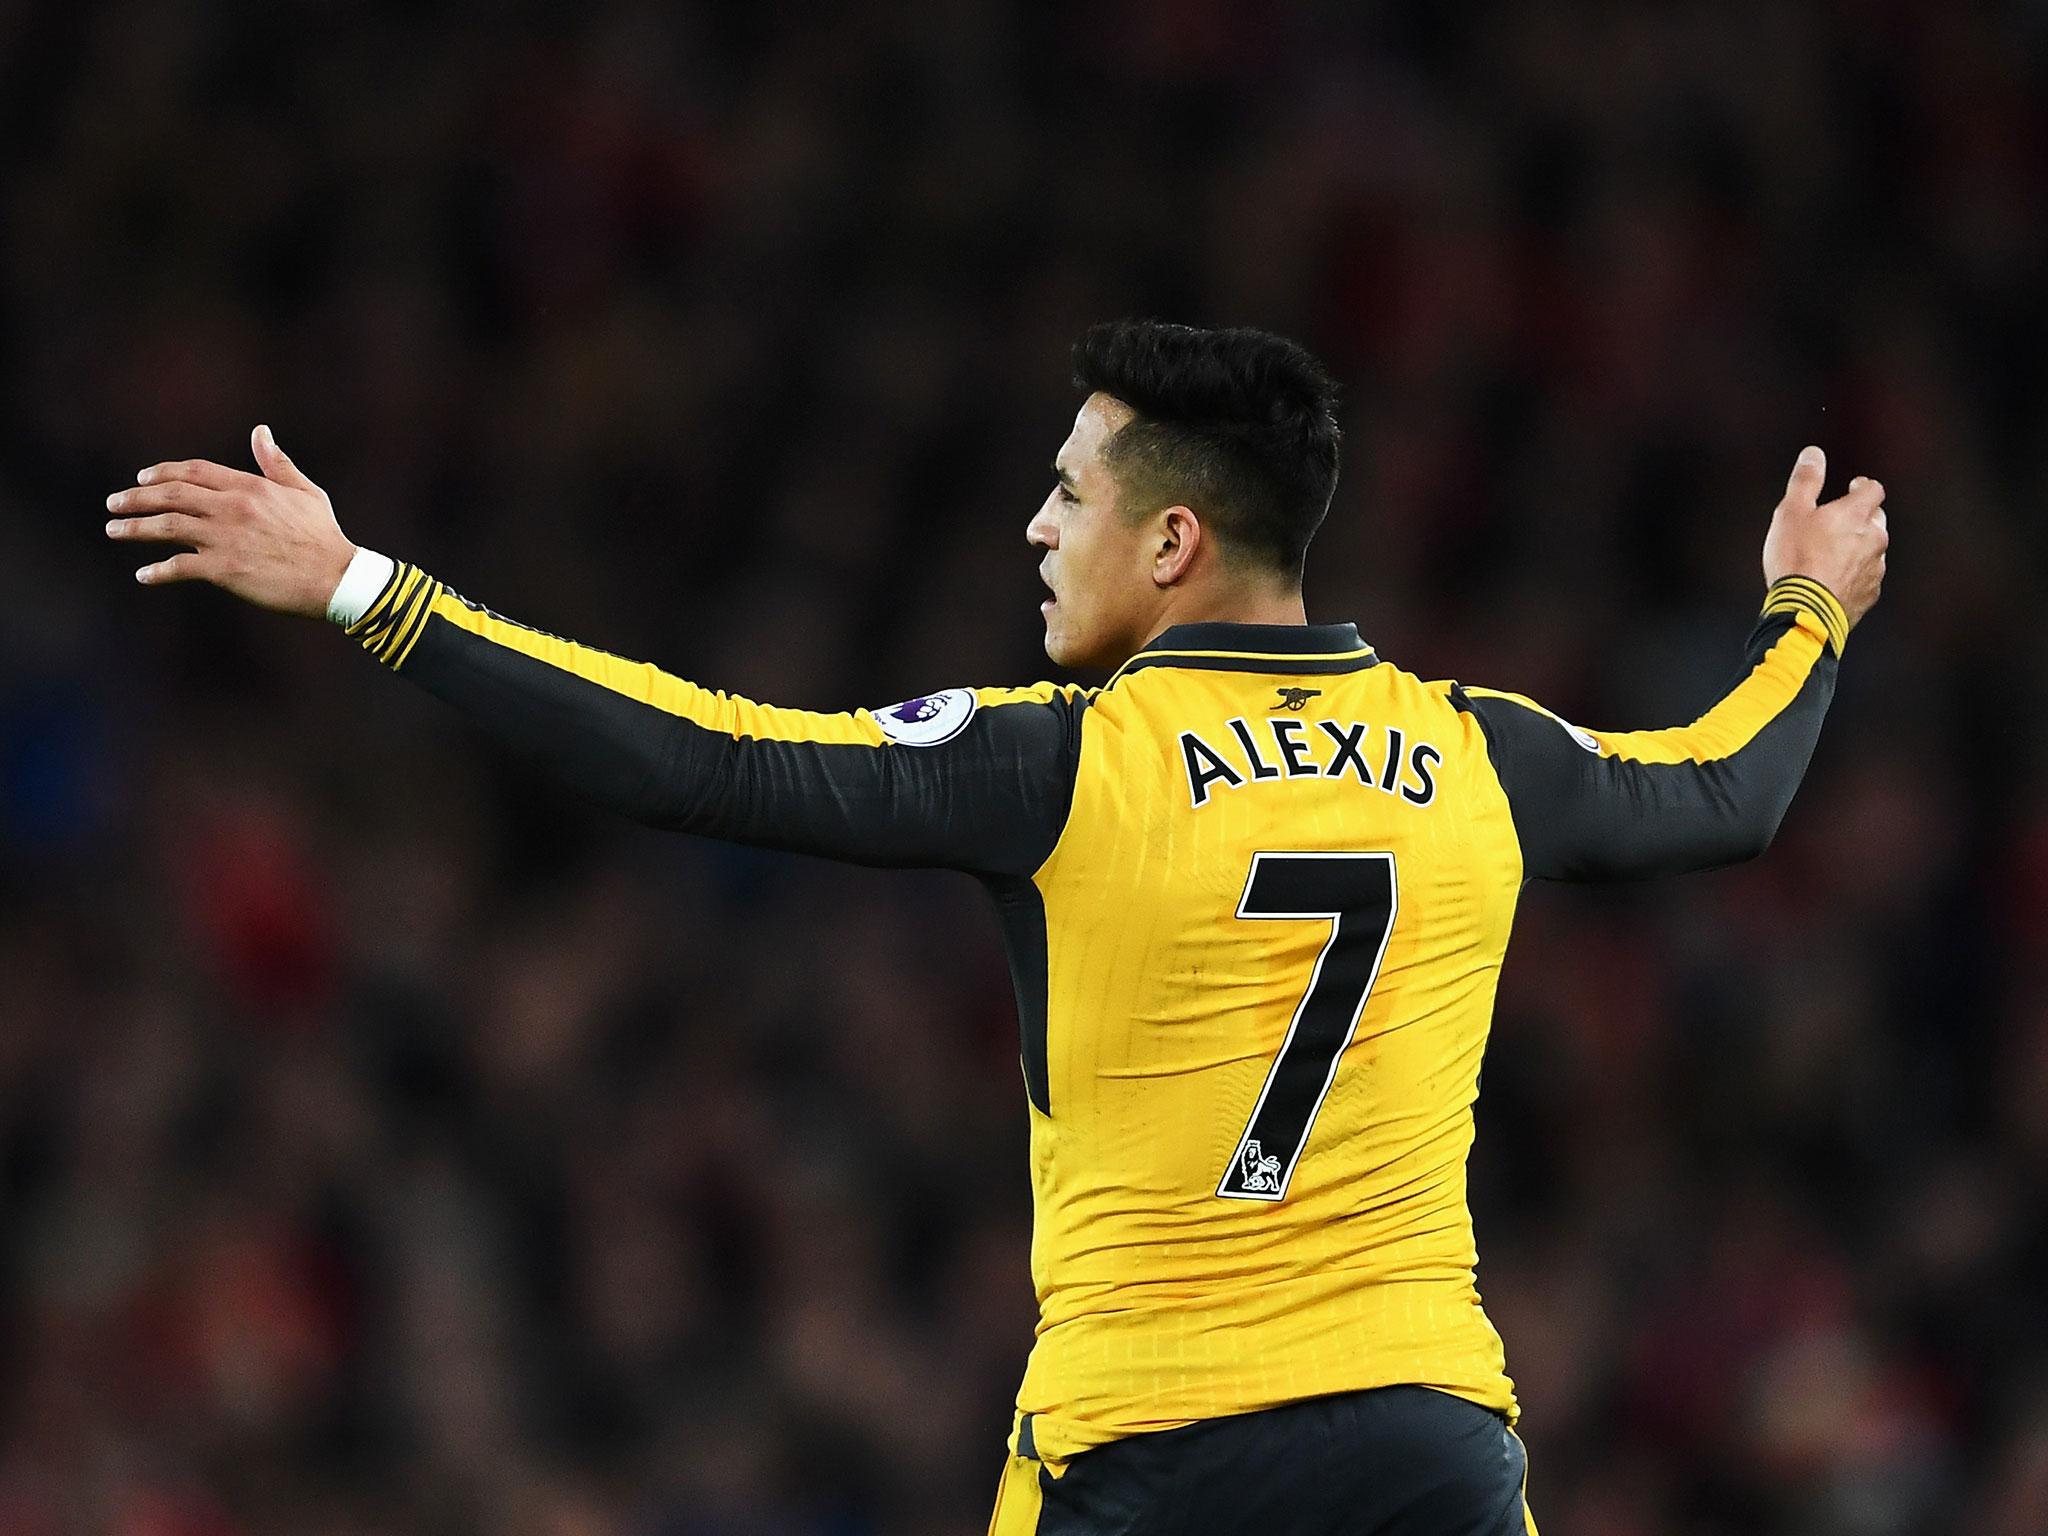 Sanchez's future at the club is now even more unclear